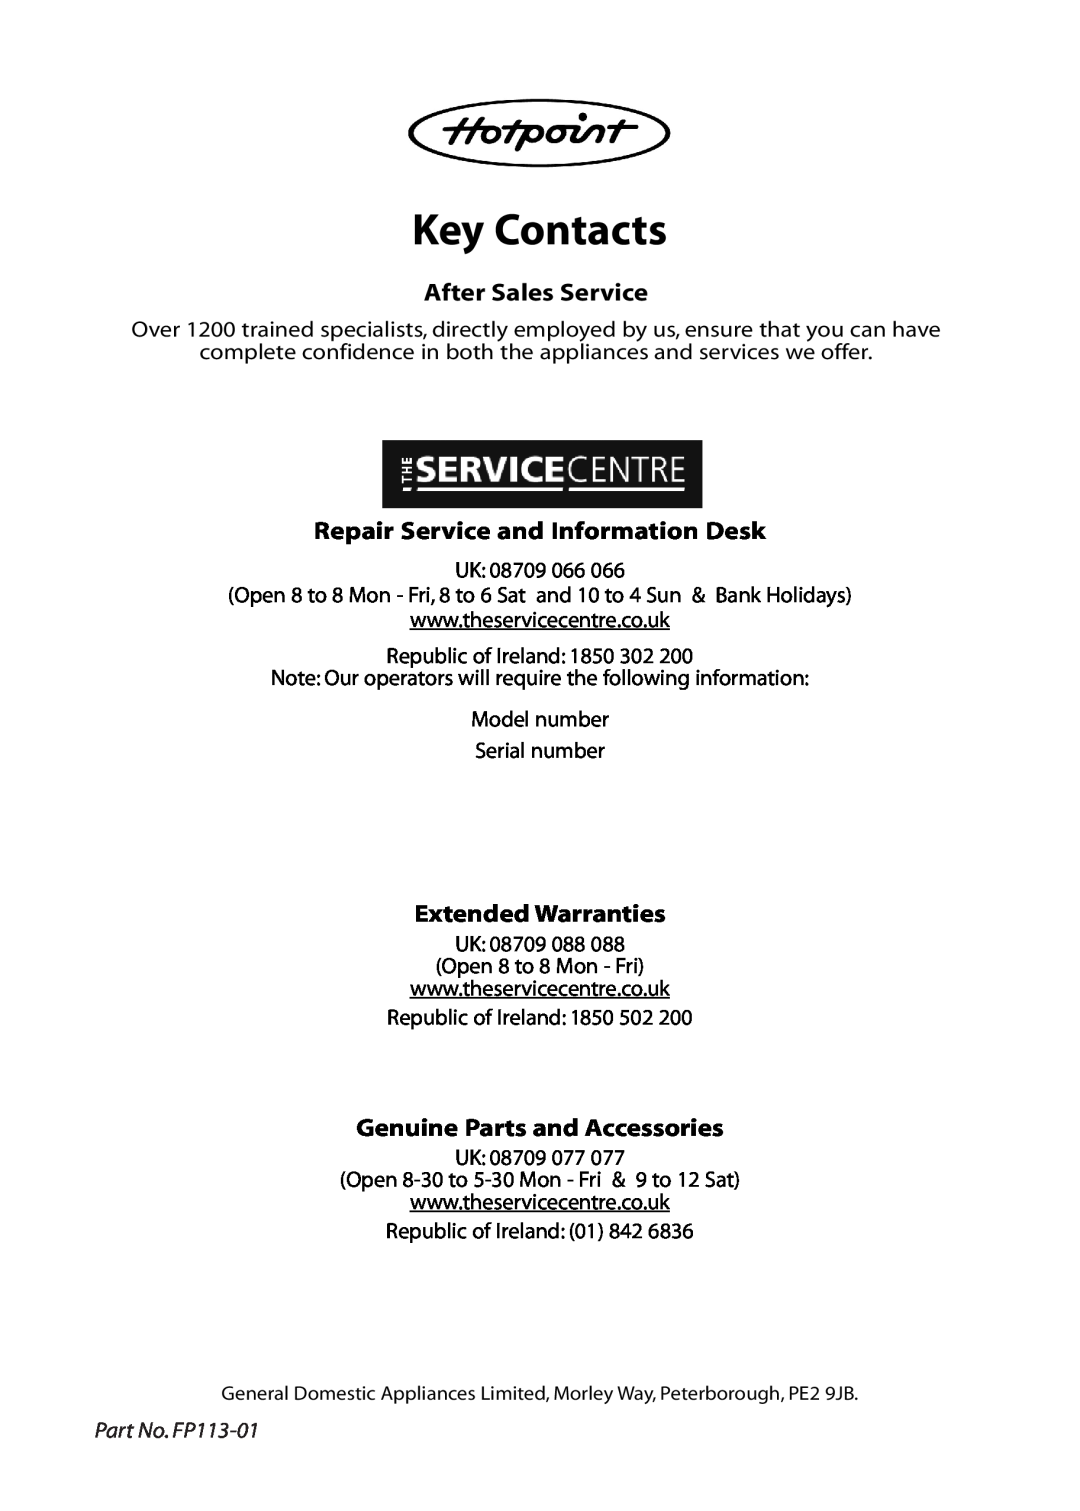 Hotpoint DF56, DF55 Key Contacts, After Sales Service, Repair Service and Information Desk, Extended Warranties 